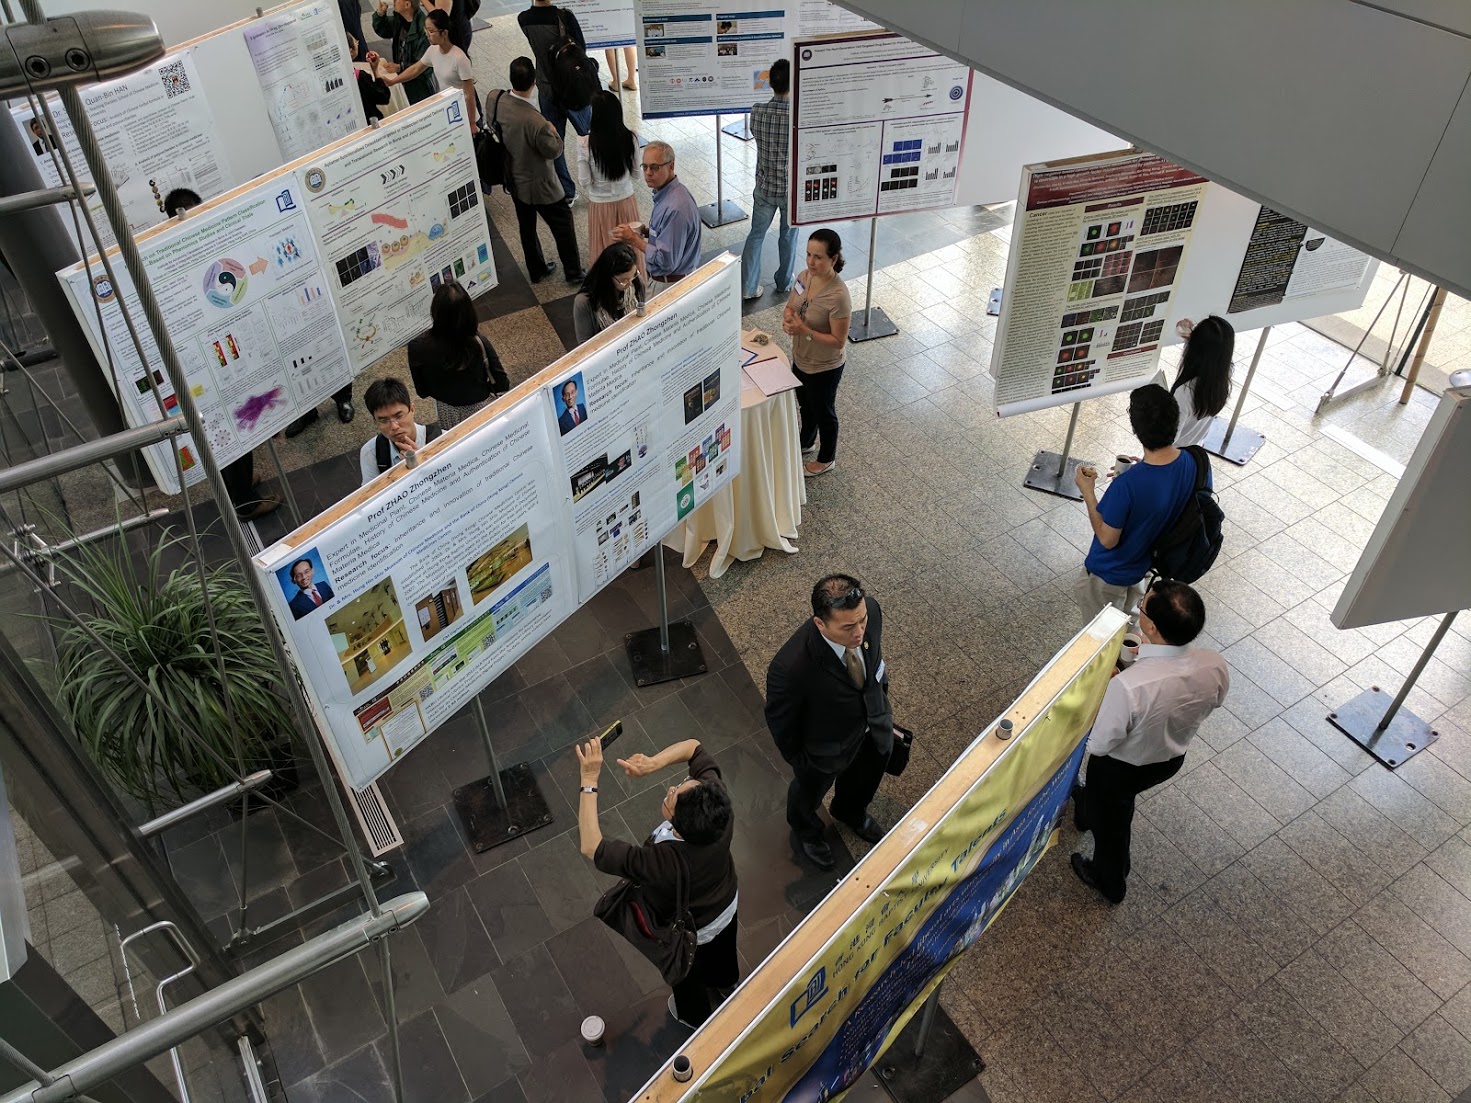 Attendees browse posters at the Traditional Chinese Medicine Symposium at HMS on June 20 and 21